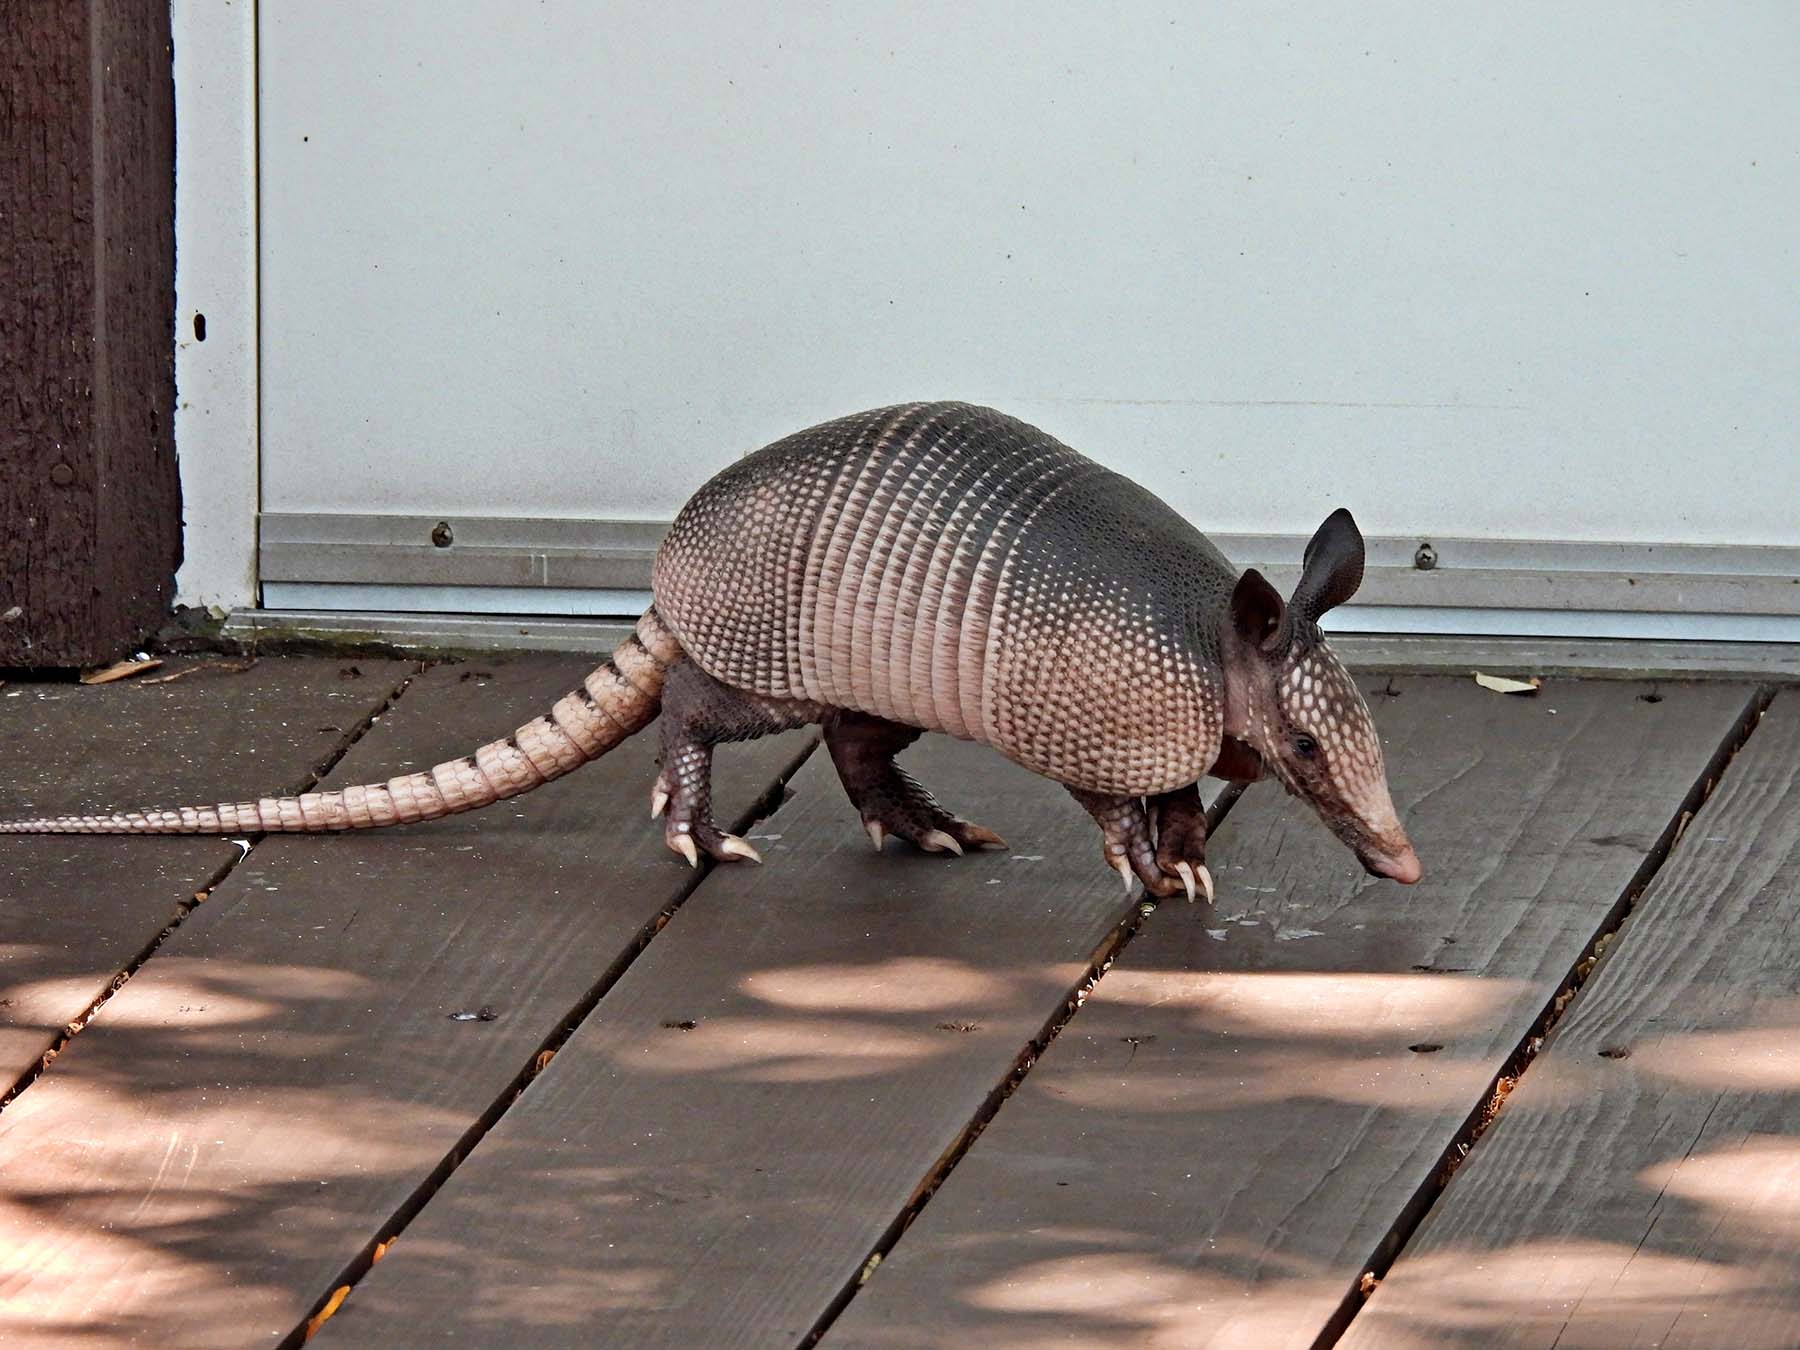 An armadillo, the source of some leprosy cases, walks across a broadwalk.